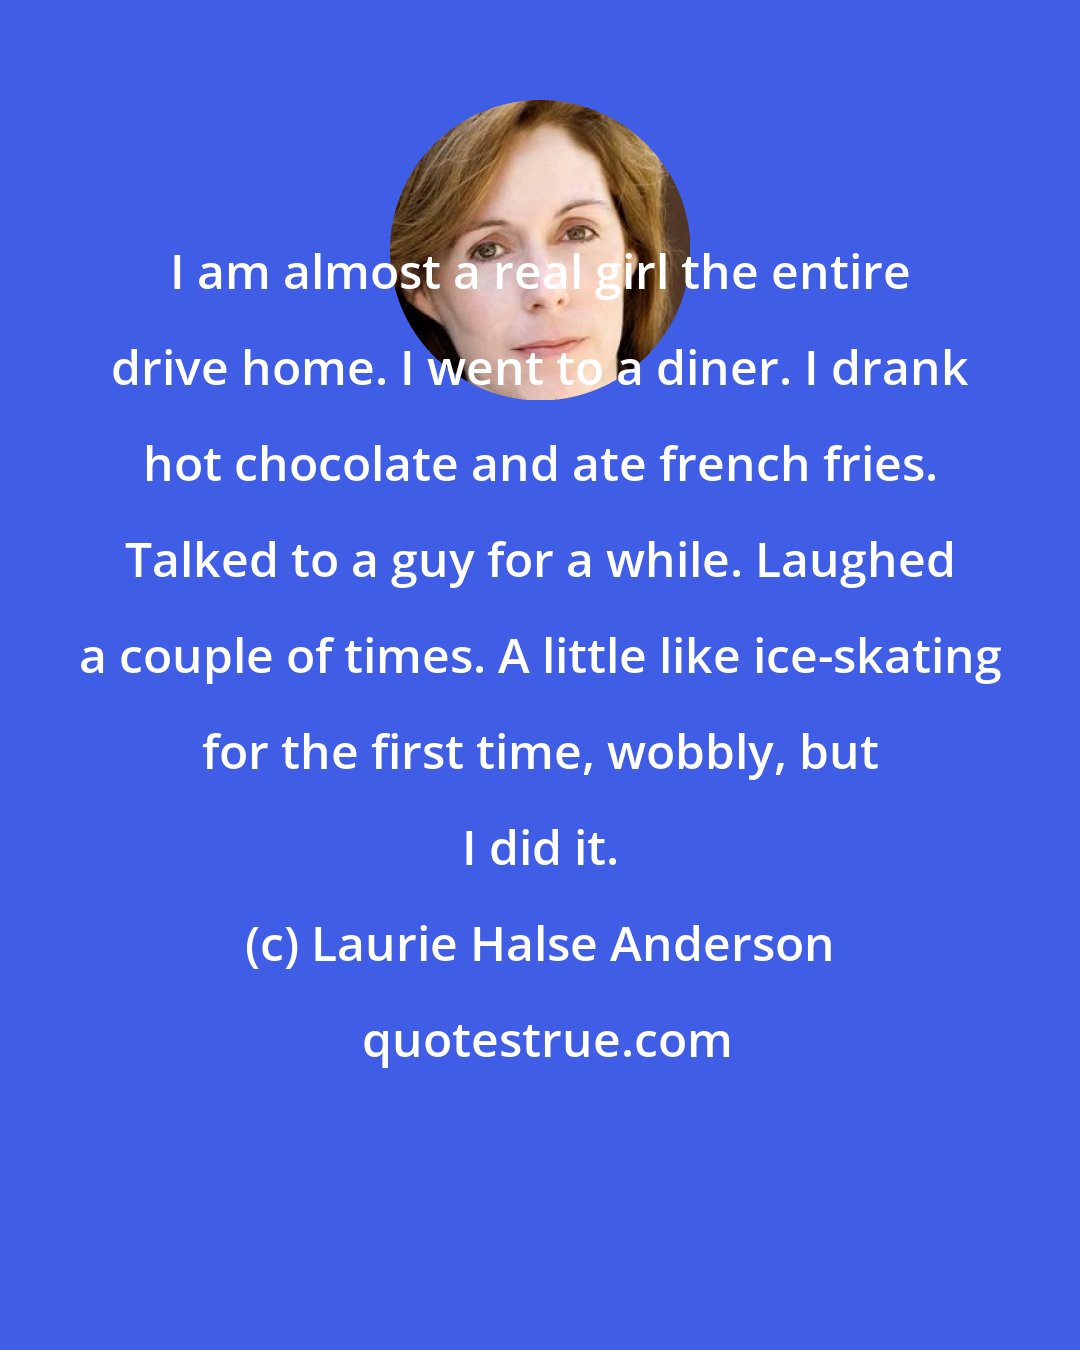 Laurie Halse Anderson: I am almost a real girl the entire drive home. I went to a diner. I drank hot chocolate and ate french fries. Talked to a guy for a while. Laughed a couple of times. A little like ice-skating for the first time, wobbly, but I did it.